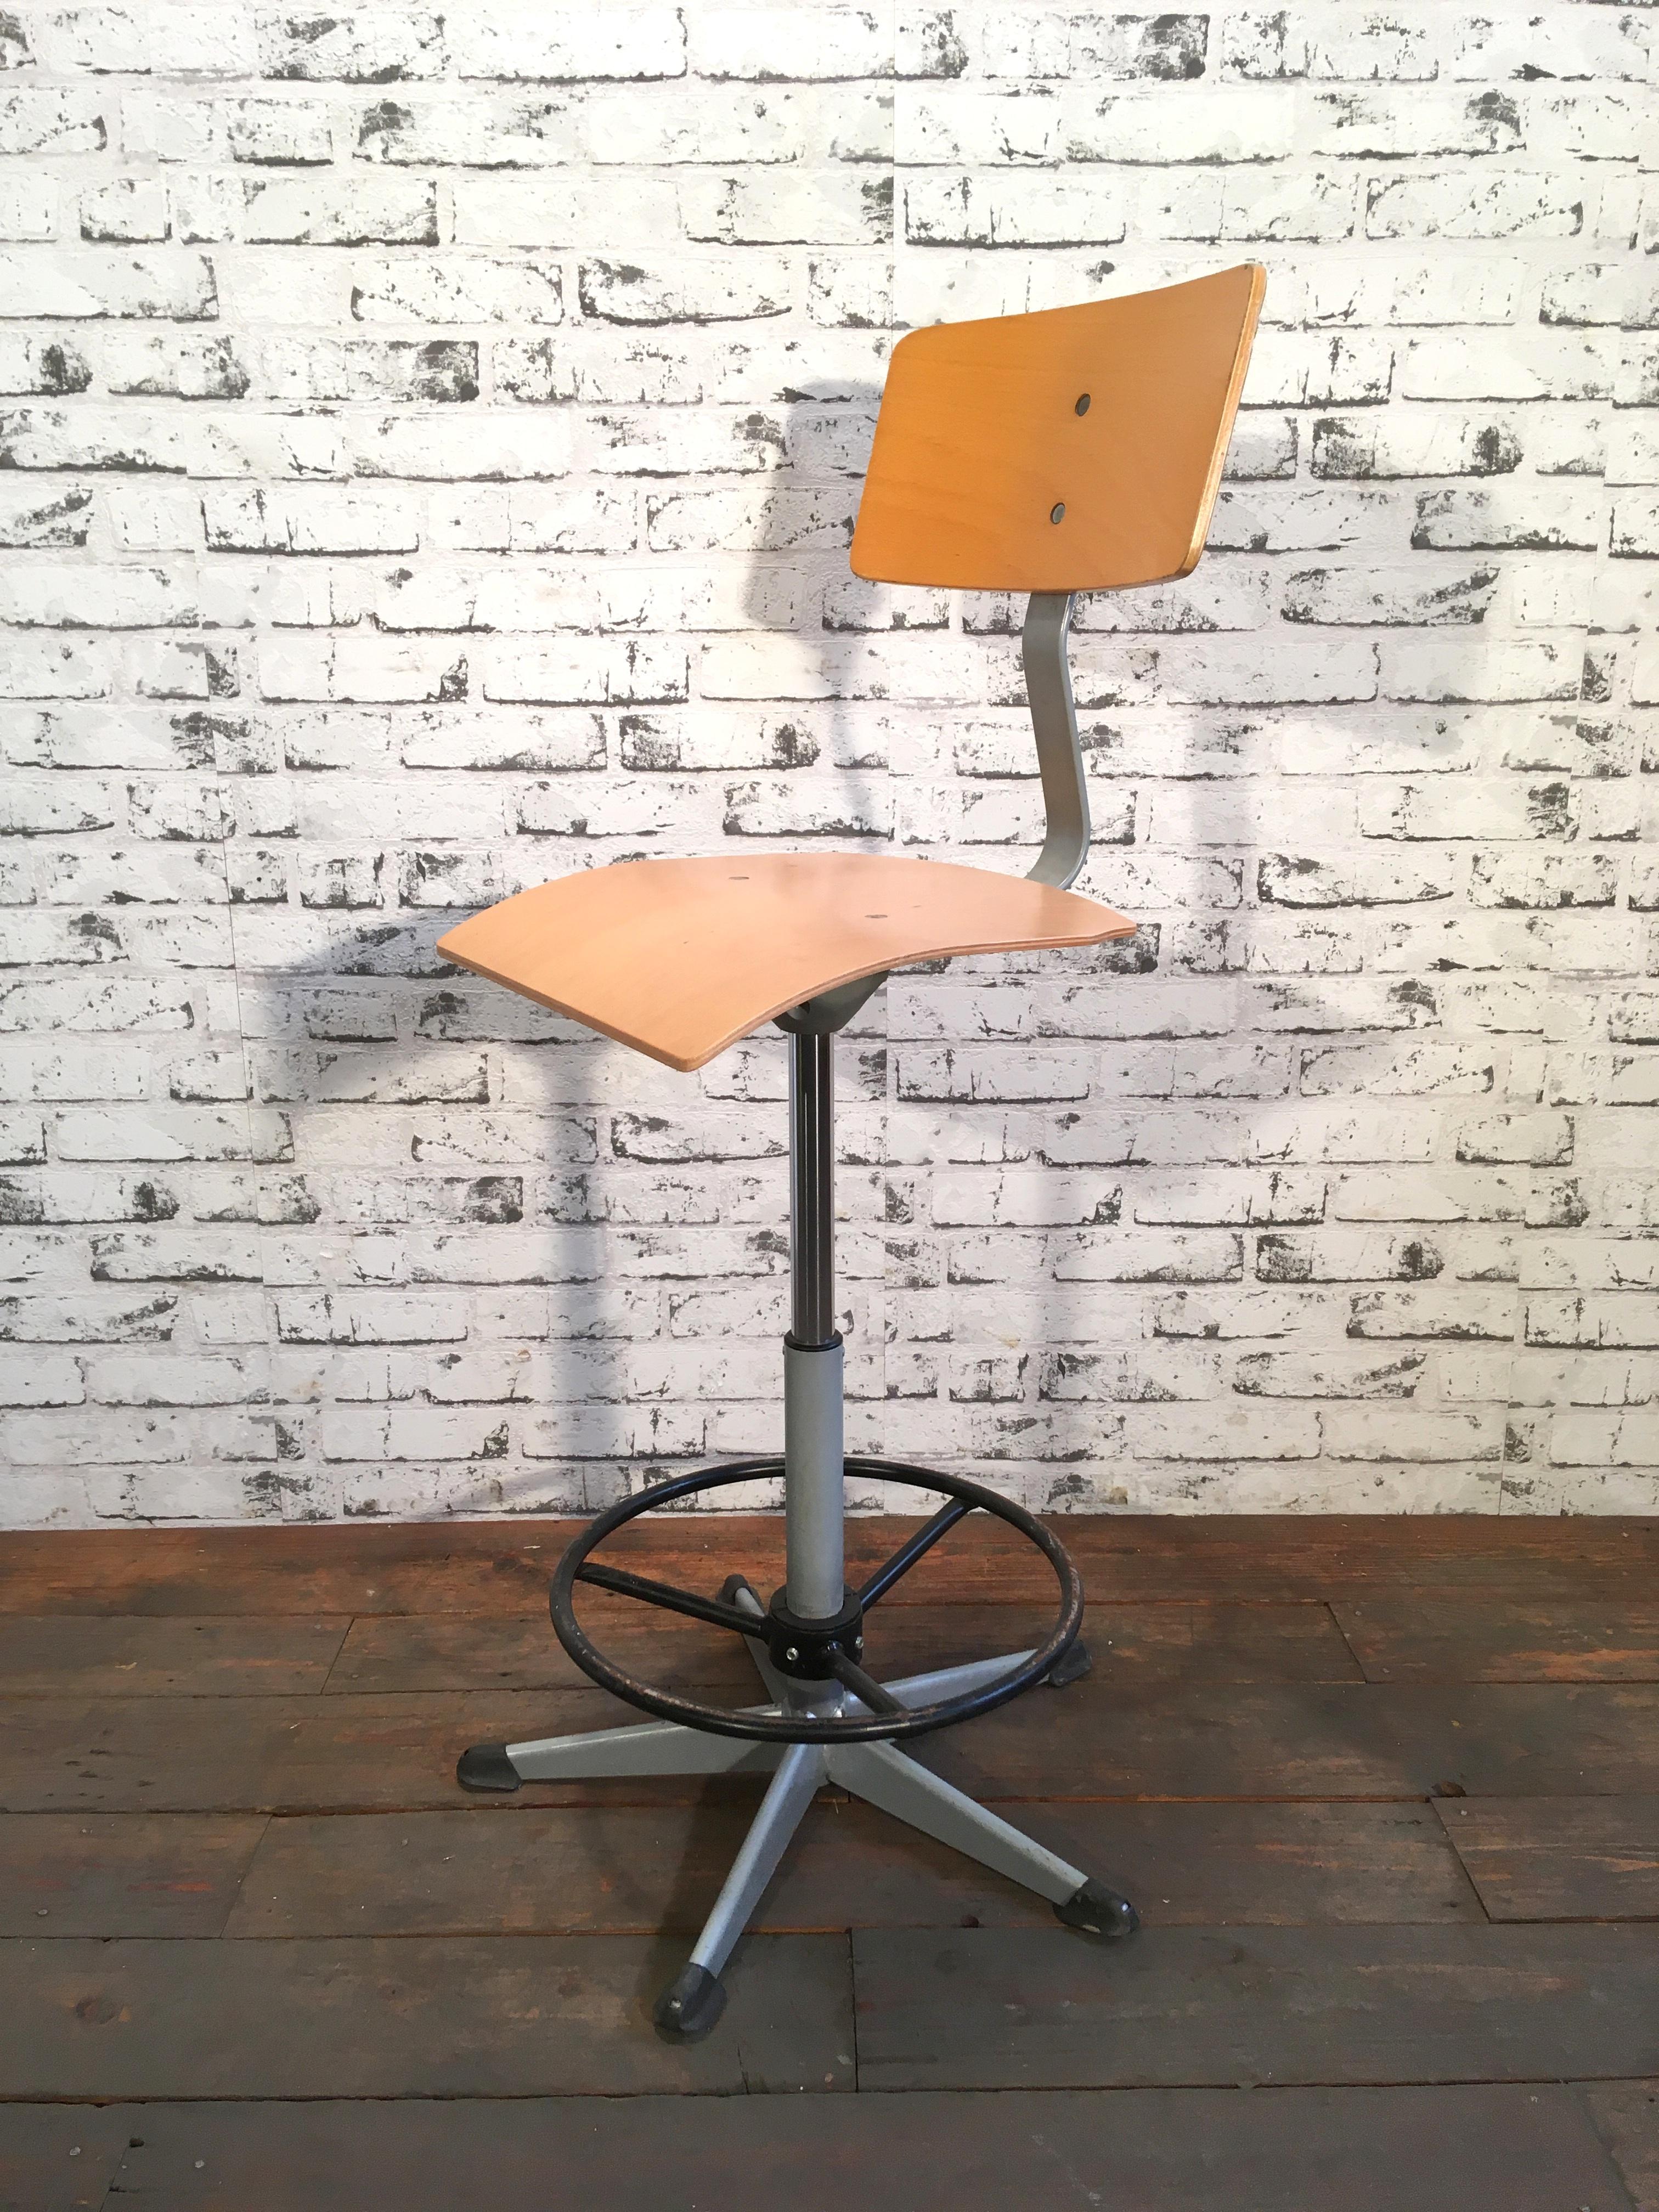 Vintage Danish rotating school chair from 1970s. Made of plywood and colored steel. With adjustable height. Five leg star base.
Dimensions :Seat 34 x 33 cm, backrest 33 x 17cm, seat height 41-61cm.